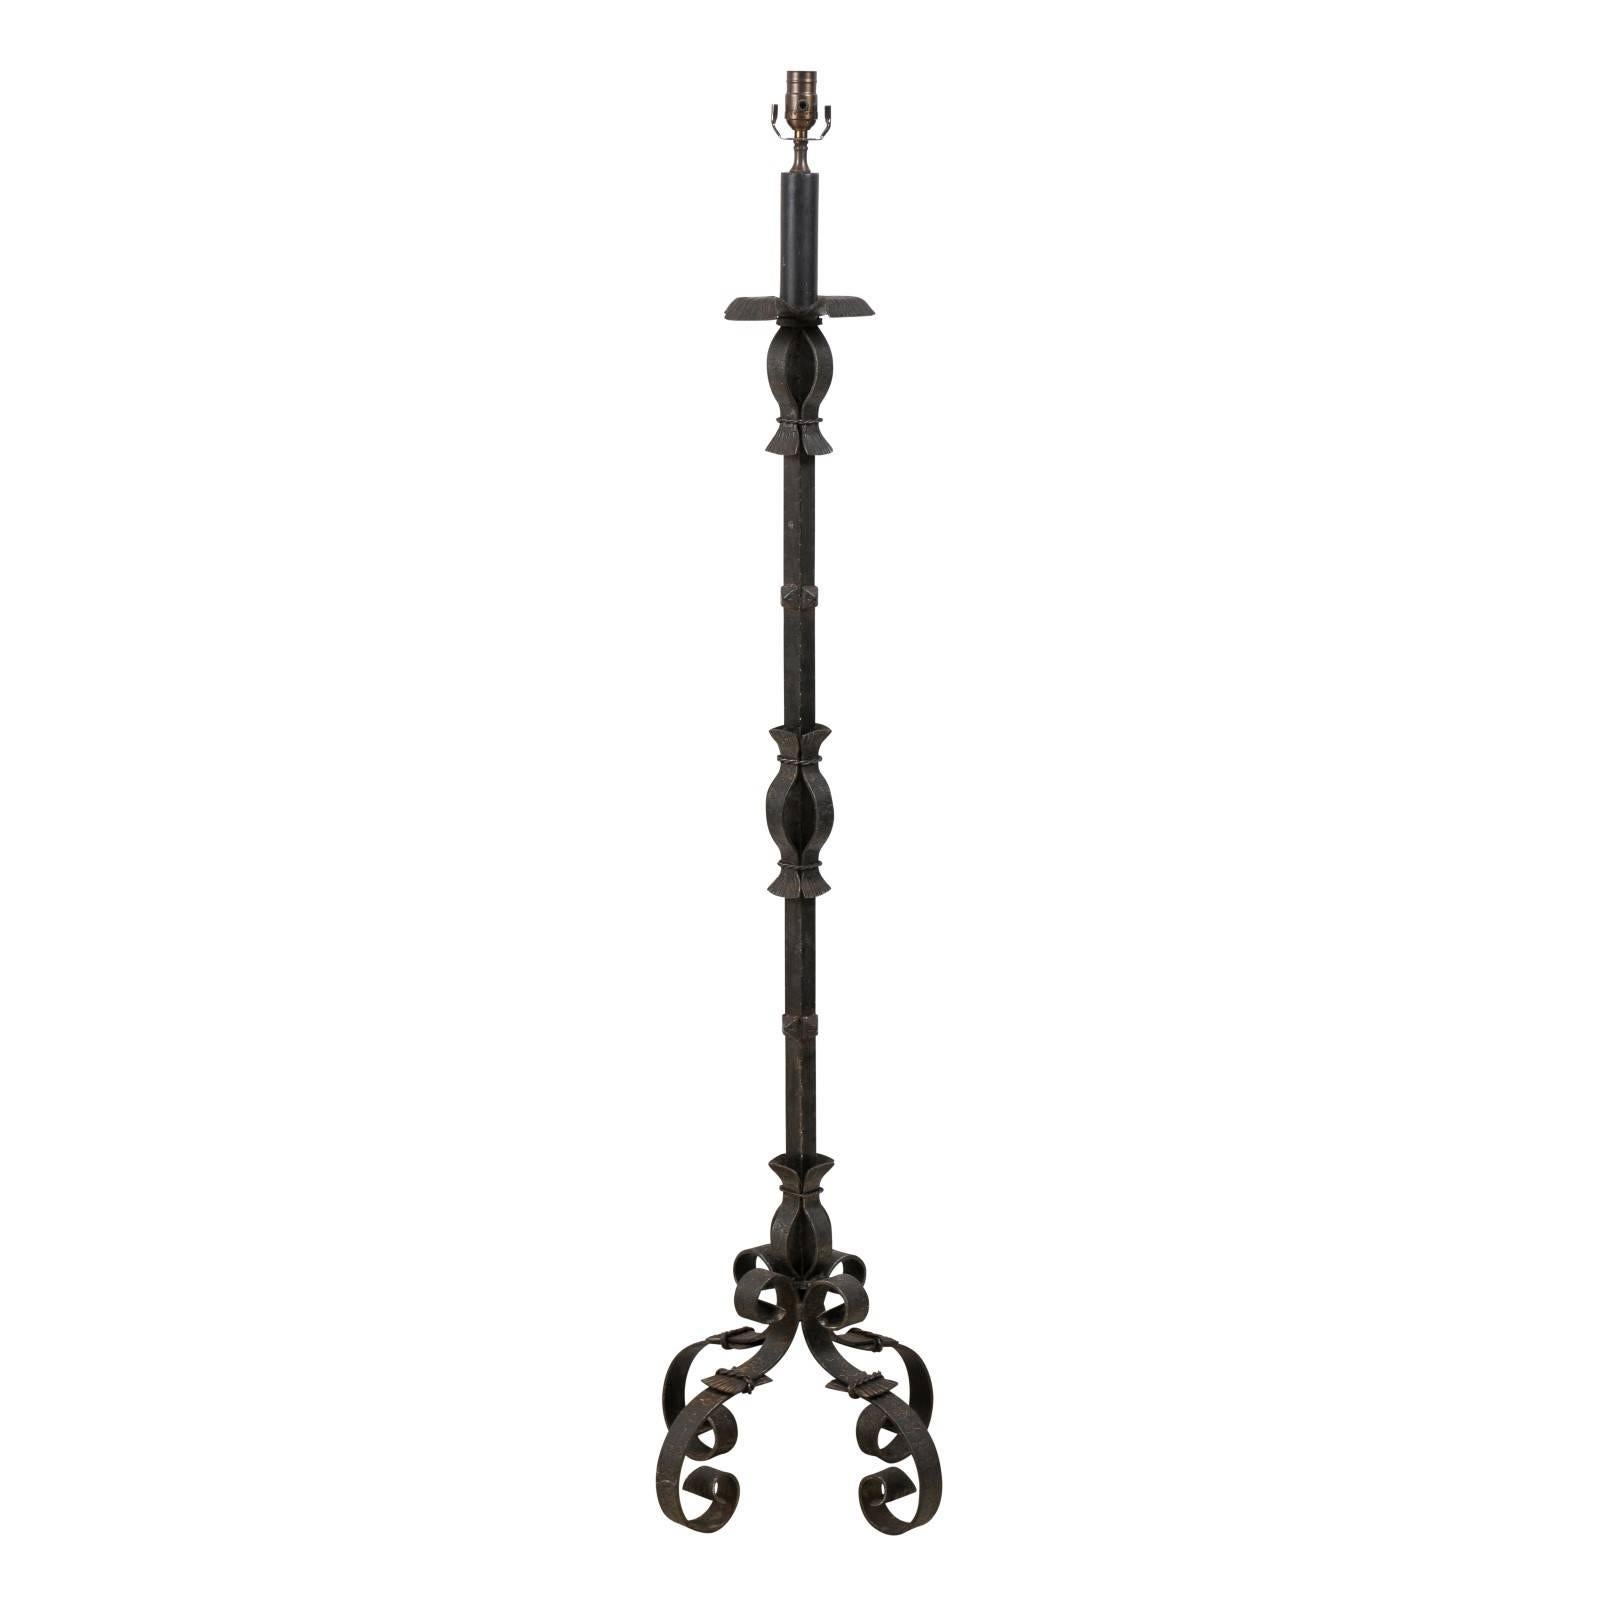 Elegant French Forged Iron Floor Lamp in Black Color on Four Scrolled Feet For Sale